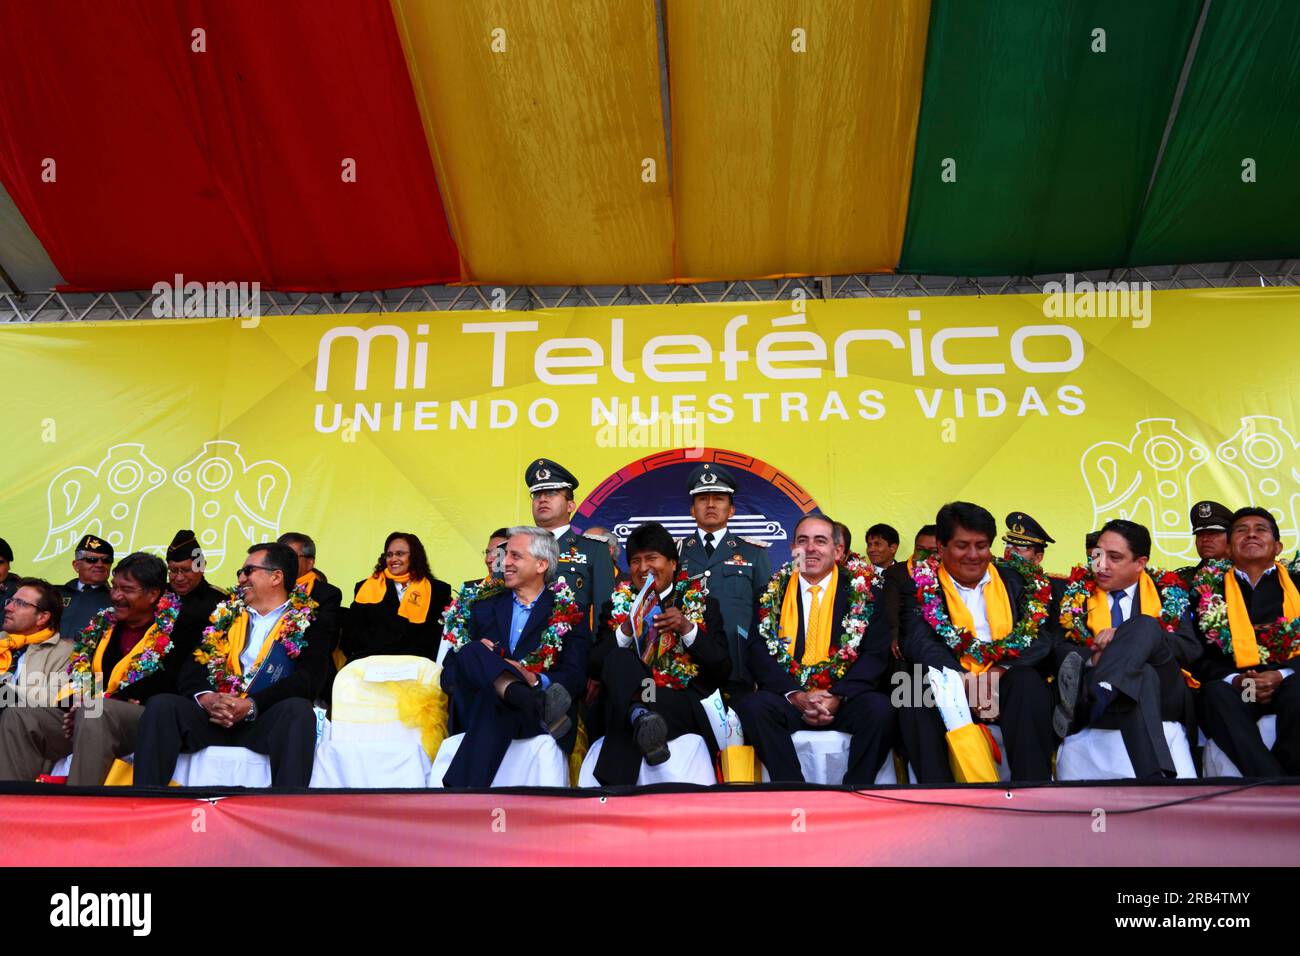 El Alto, Bolivia, 15th September 2014. Bolivian president Evo Morales (centre) and vice president Alvaro Garcia Linera (left centre) at the station in Ciudad Satelite during the inauguration ceremony of the Yellow Line. The Yellow Line is the second of three cable car lines to be opened this year, and is part of an ambitious project to relieve traffic congestion. The first line opened in May, when all three are open they will be the world's longest urban cable car system. The system has been built by the Austrian company Doppelmayr. Stock Photo